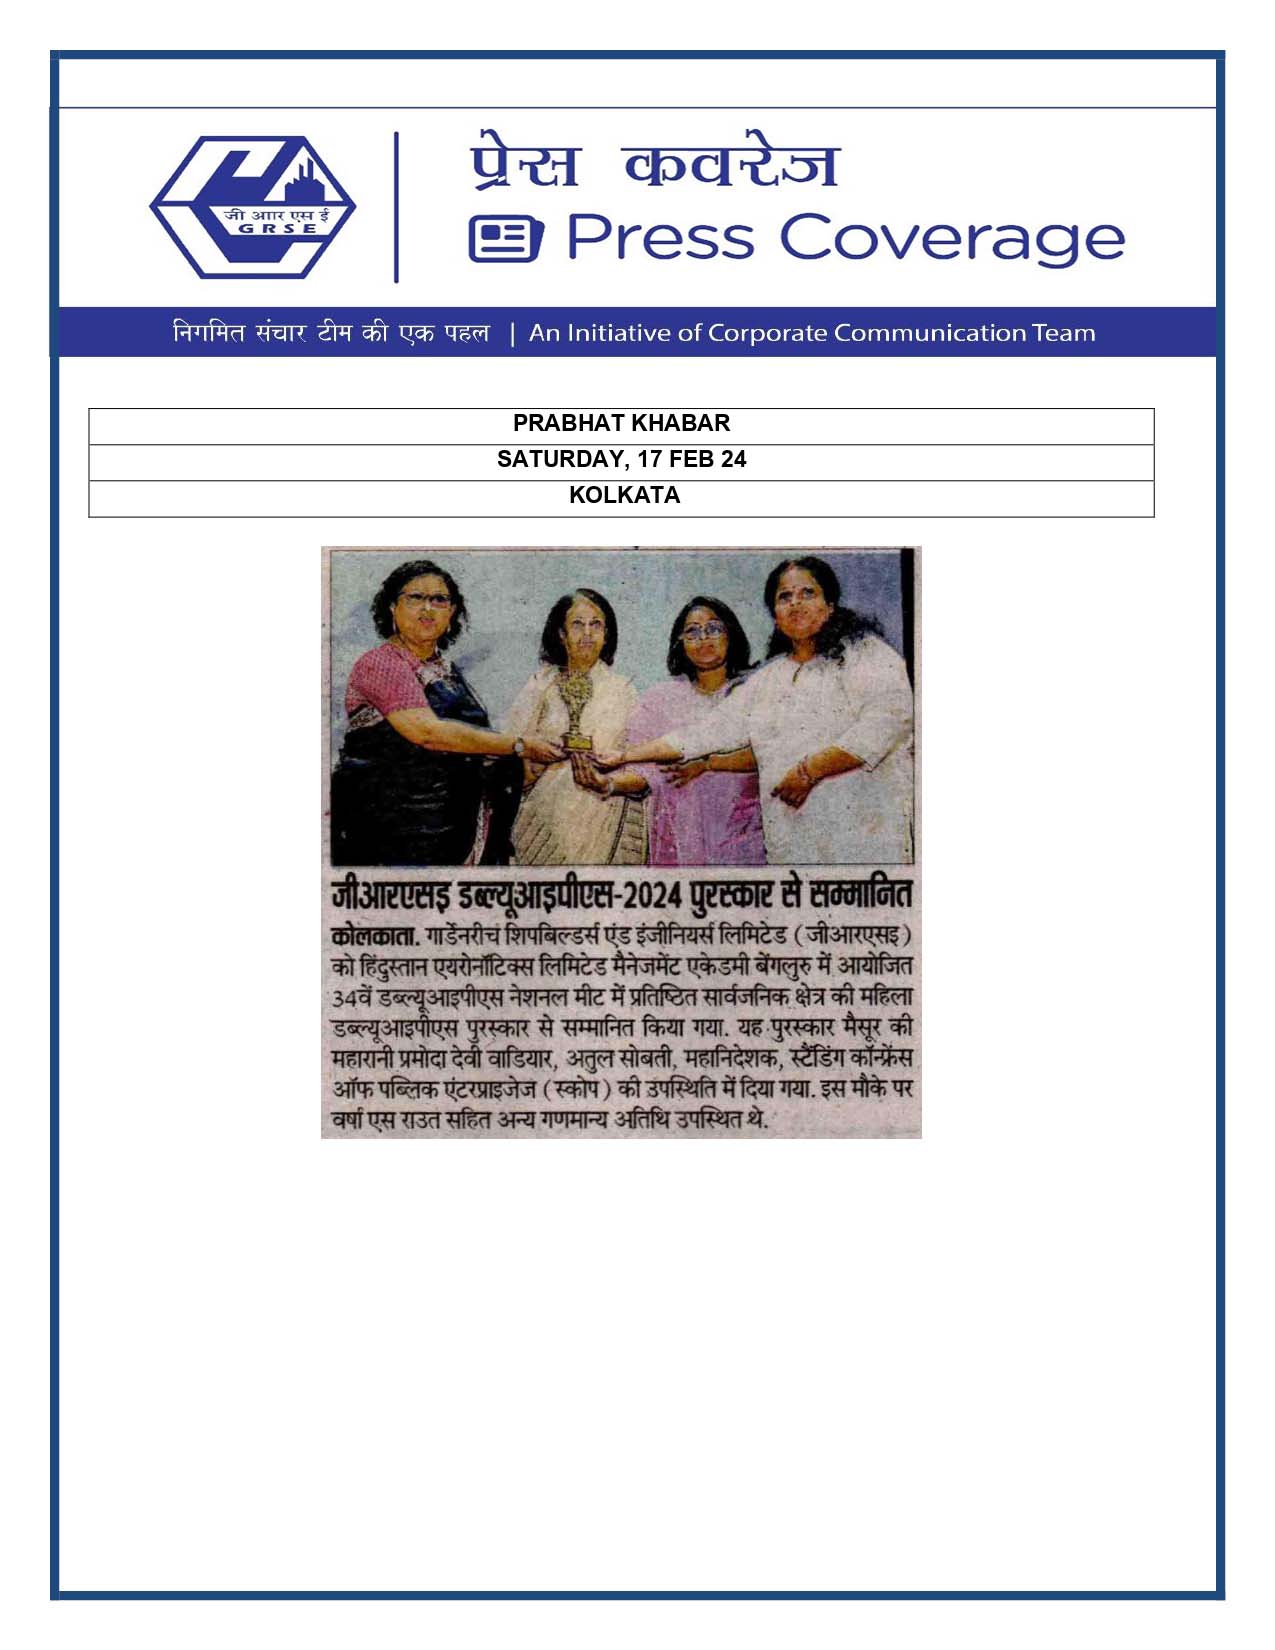 Press Coverage : Prabhat Khabar, 16 Feb 24 : GRSE Wins Award at 34th Annual Conclave of WIPS 2024